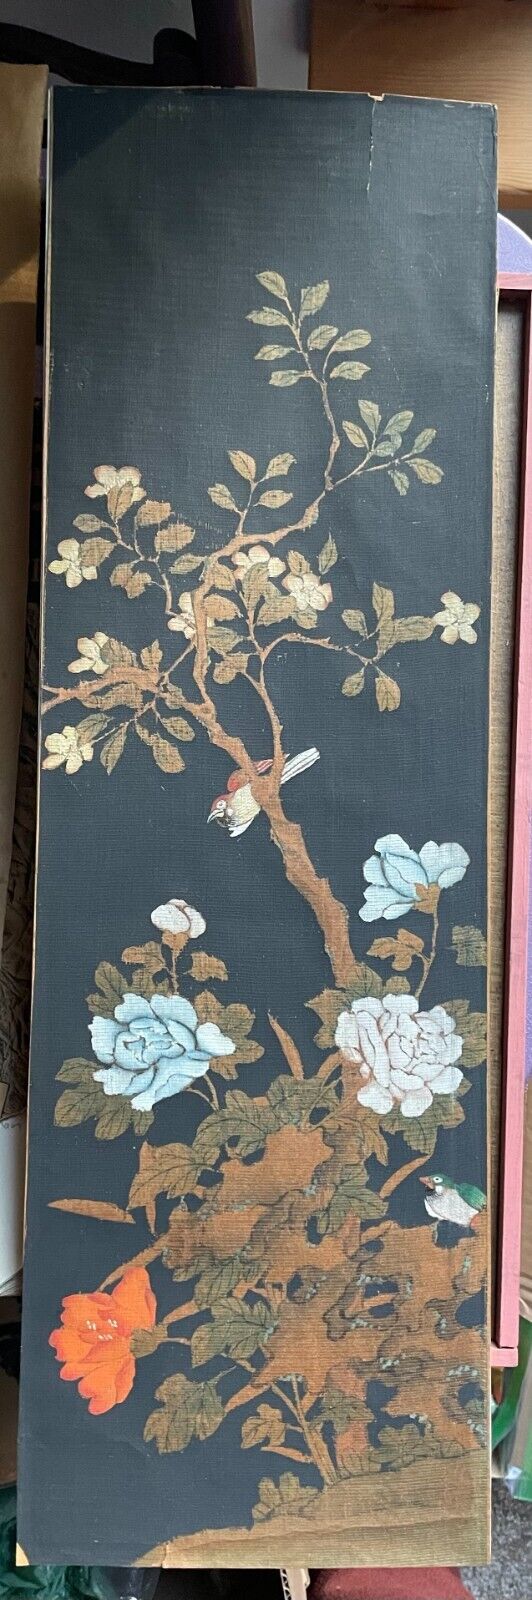 Antique, Early 20th century, Asian painting, birds and floral design,  21 x 7 in